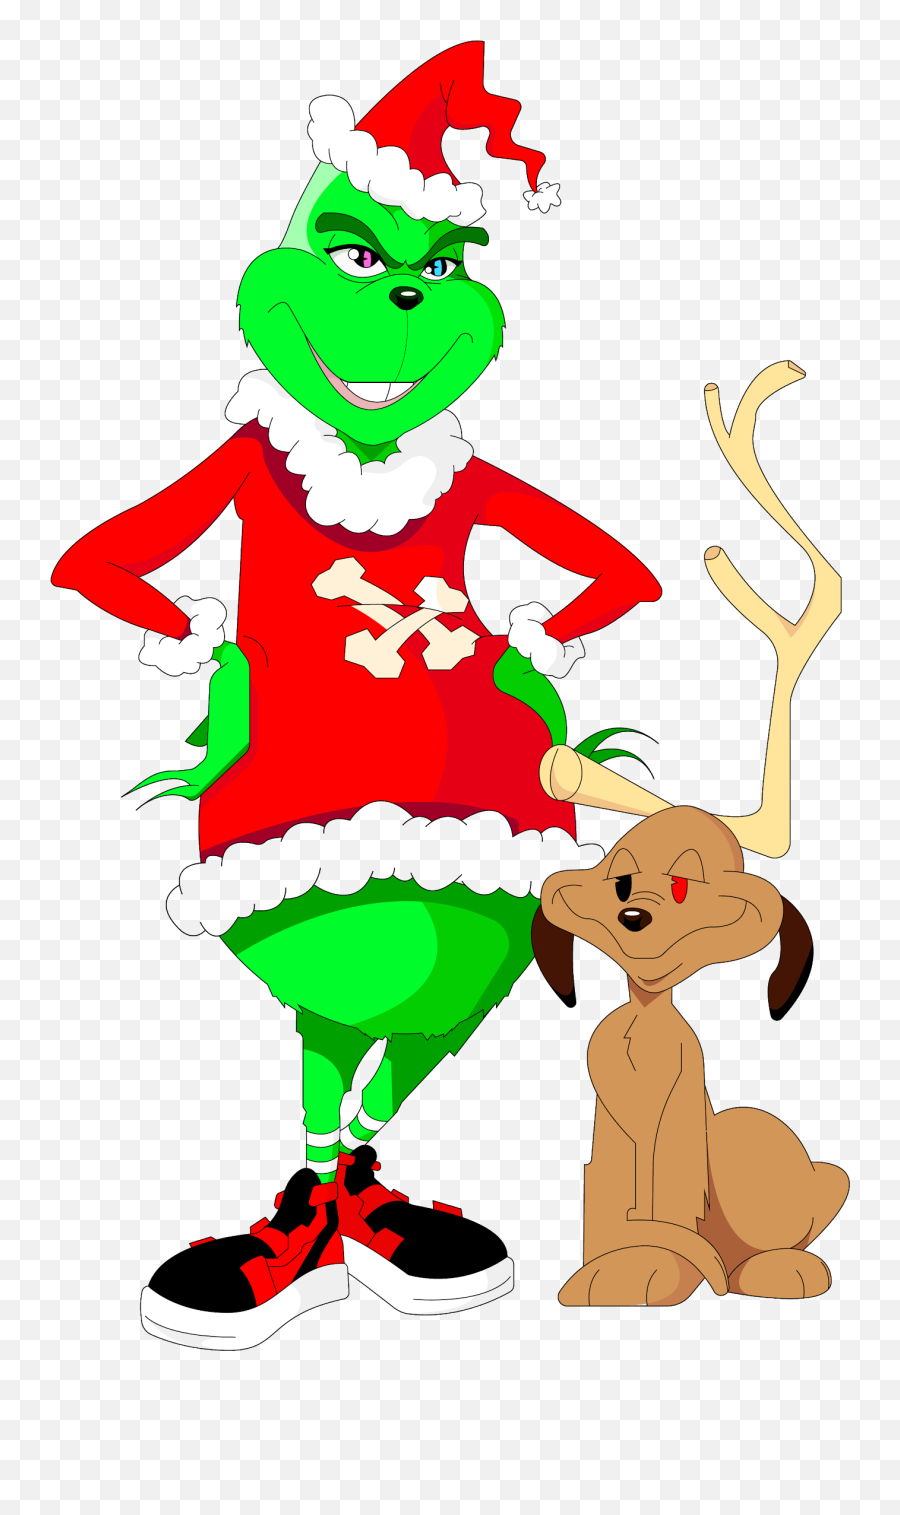 Image Of The Grinch - Grinch Transparent Clipart Png Emoji,Grinch Clipart